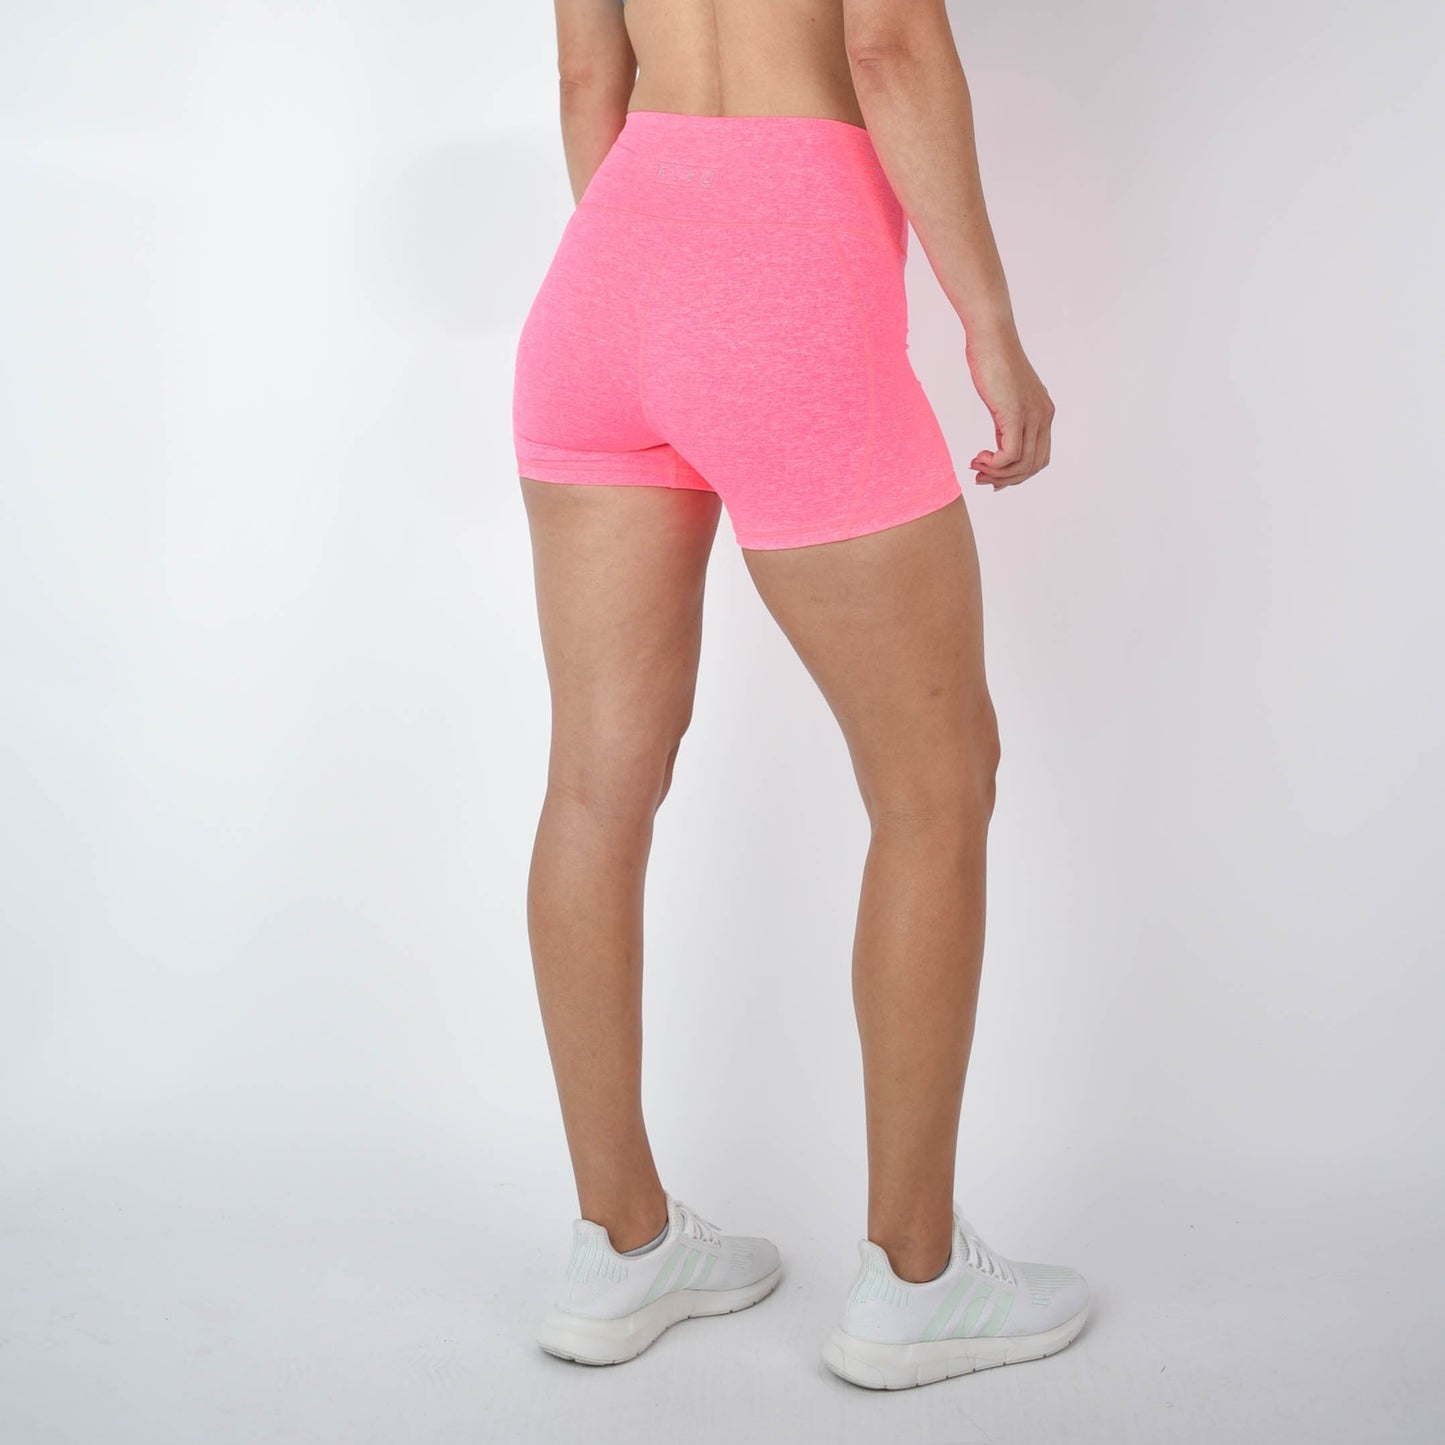 FLEO Electric Heather Pink Shorts (True High Contour) - 9 for 9